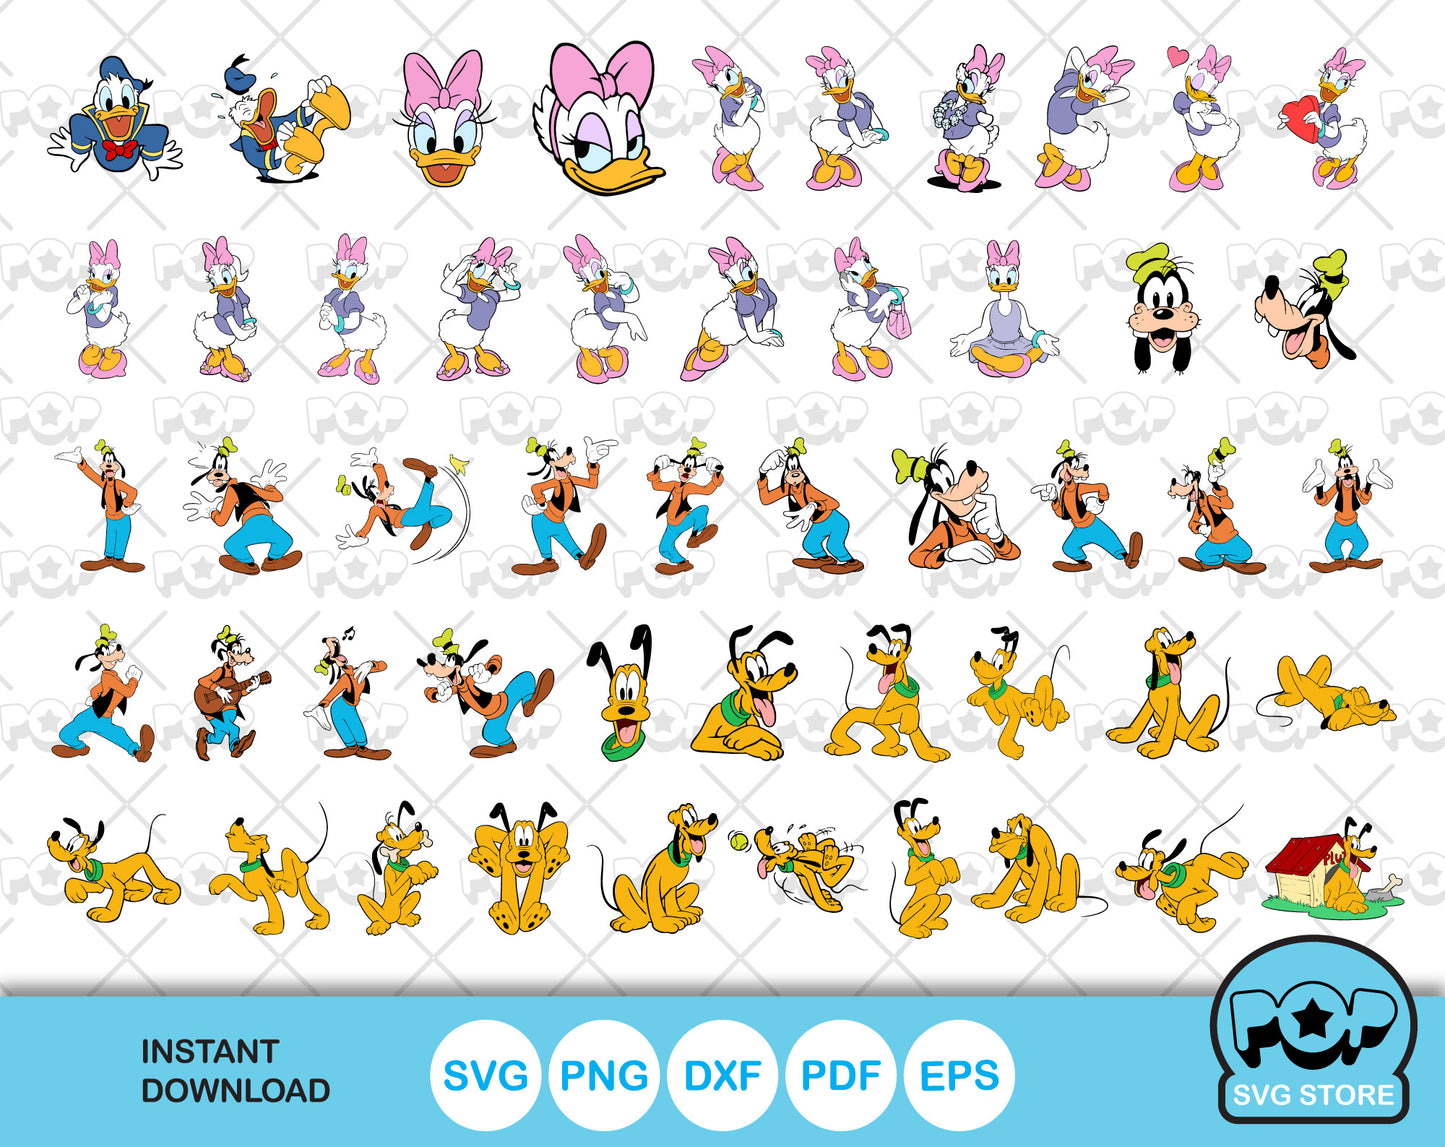 Mickey and Friends 100 cliparts bundle, svg cut files for Cricut / Silhouette, Mickey & friends png, dxf